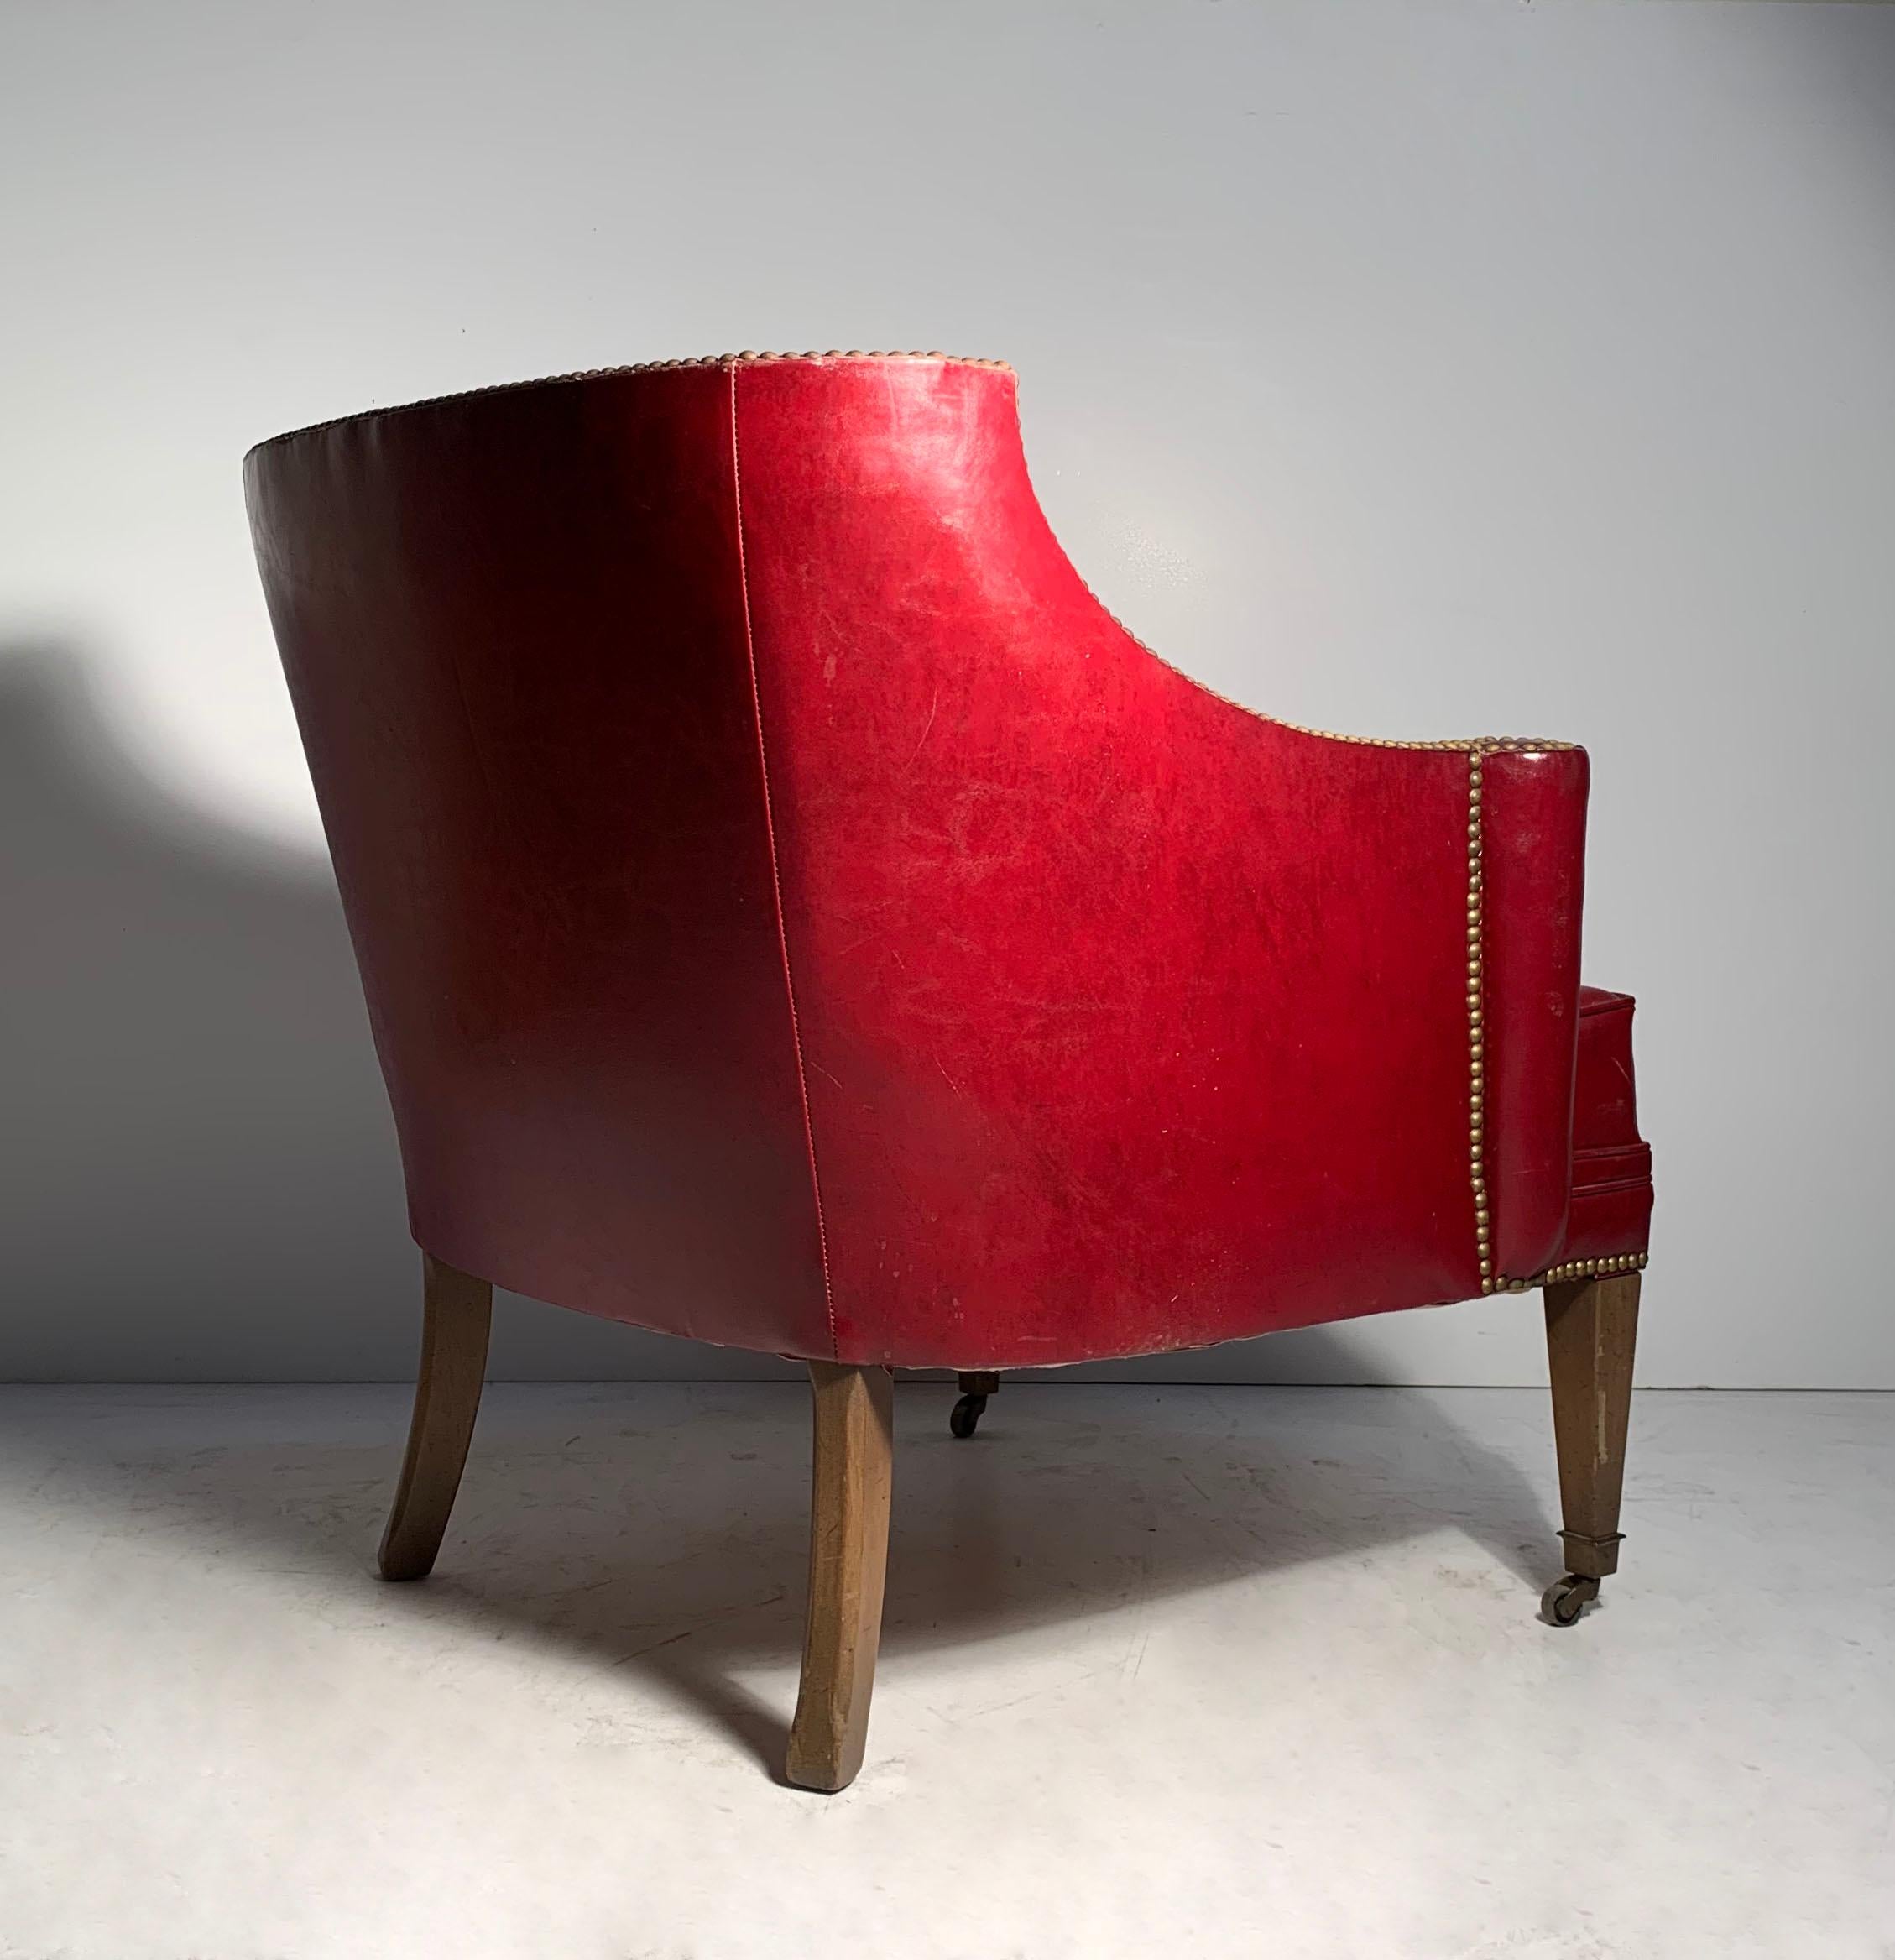 American Vintage Decorator Chair in Red Leather on Castors